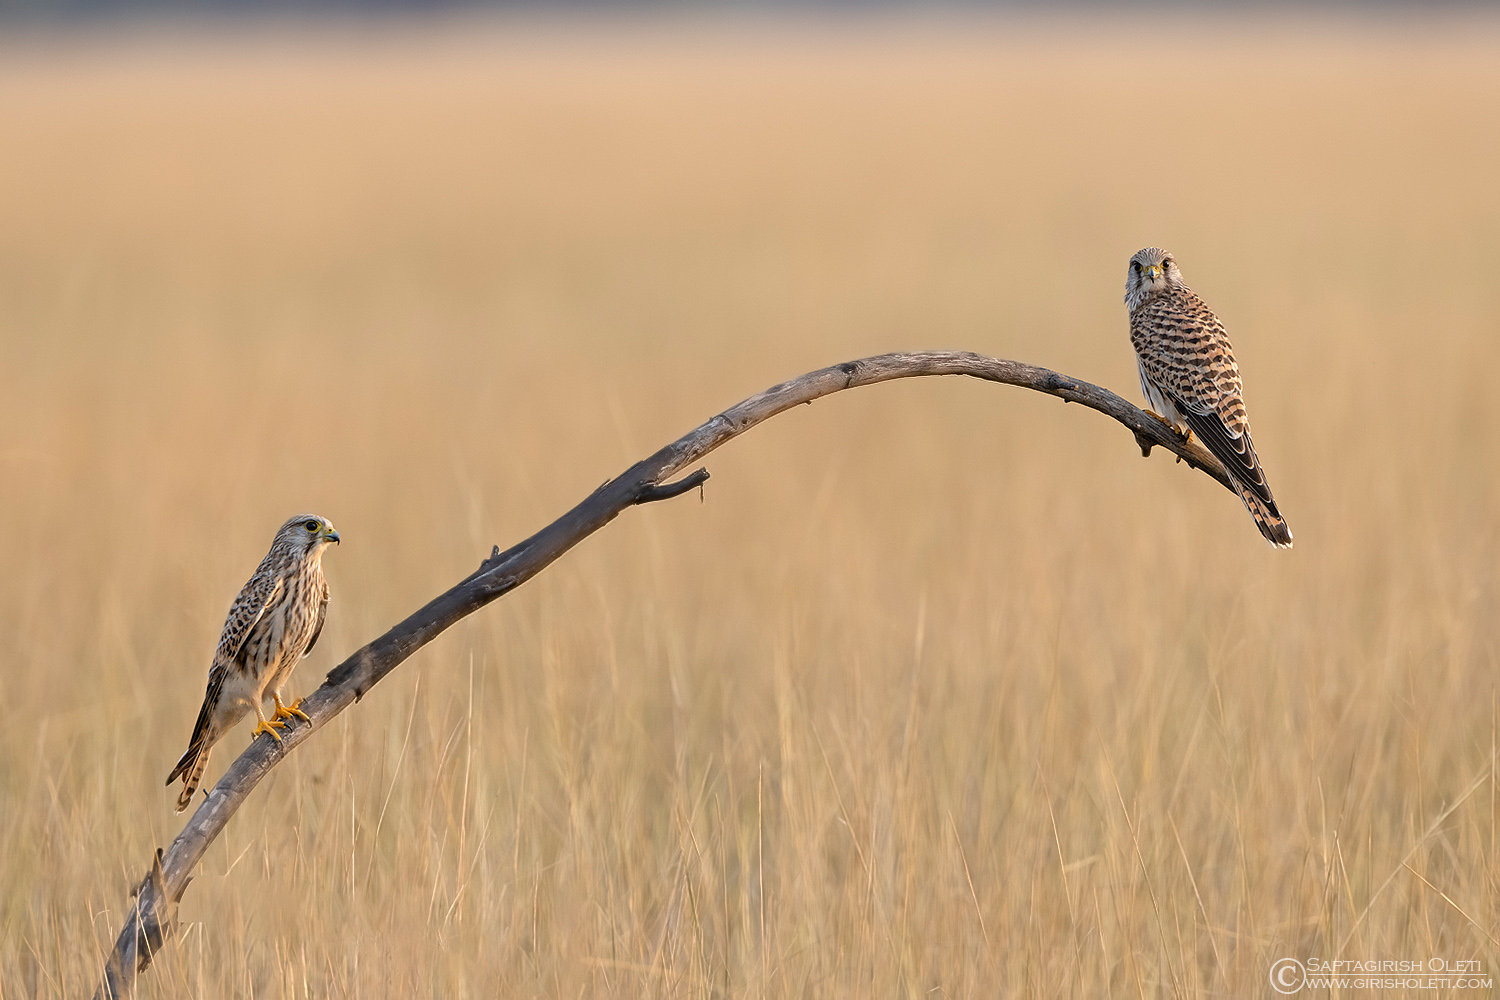 Common Kestrel photographed at Taal Chappar, Rajasthan